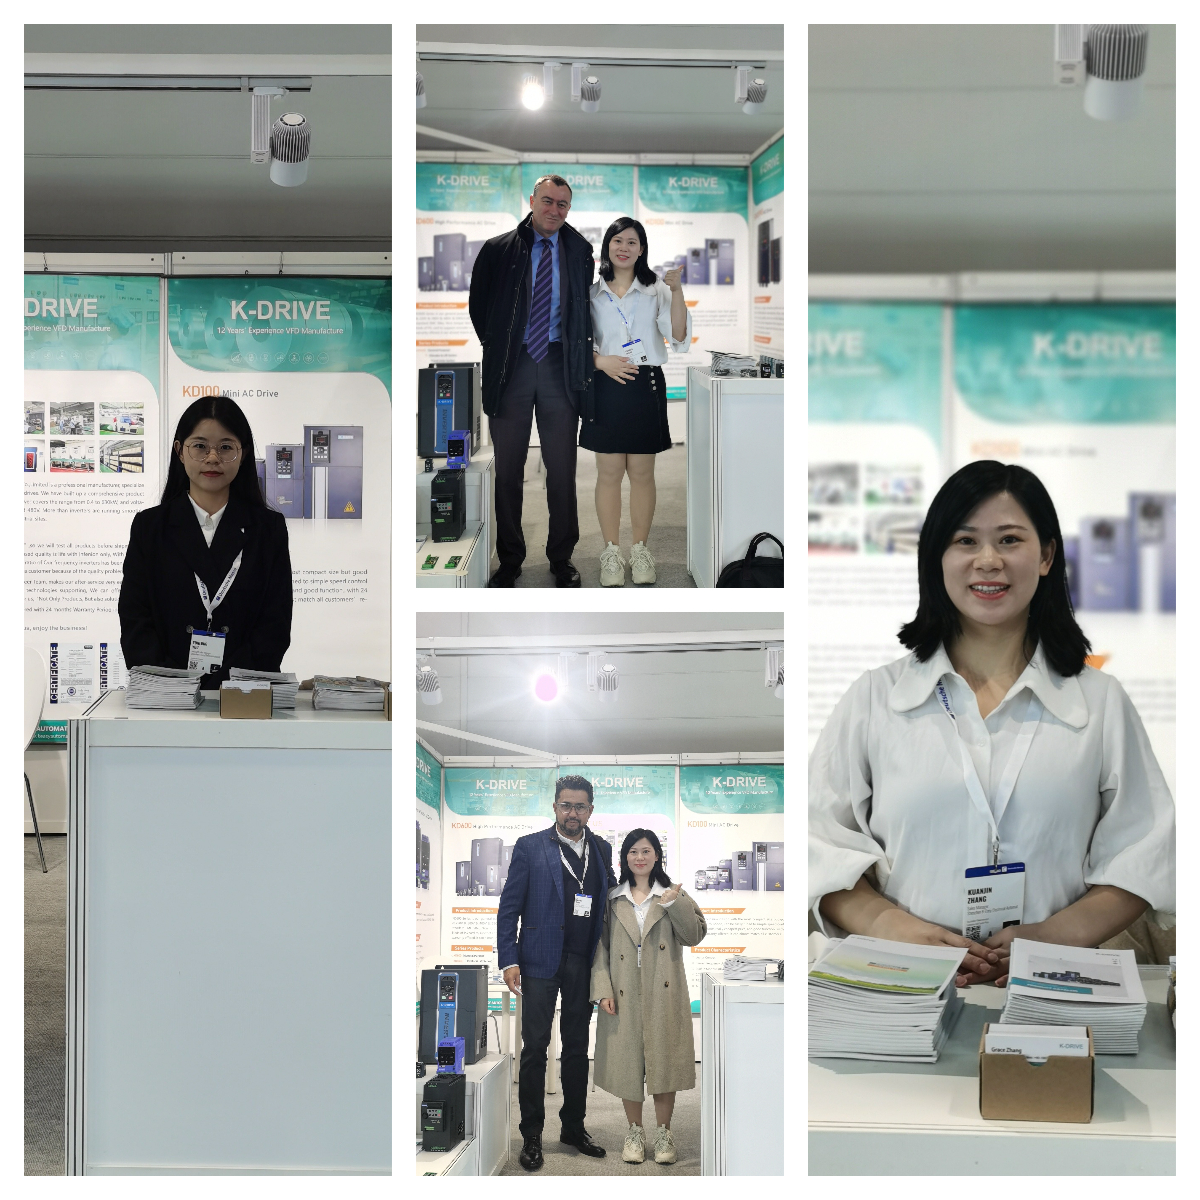 K-Easy Automation Co.,Ltd achieved complete success at the Exhibition in Germany